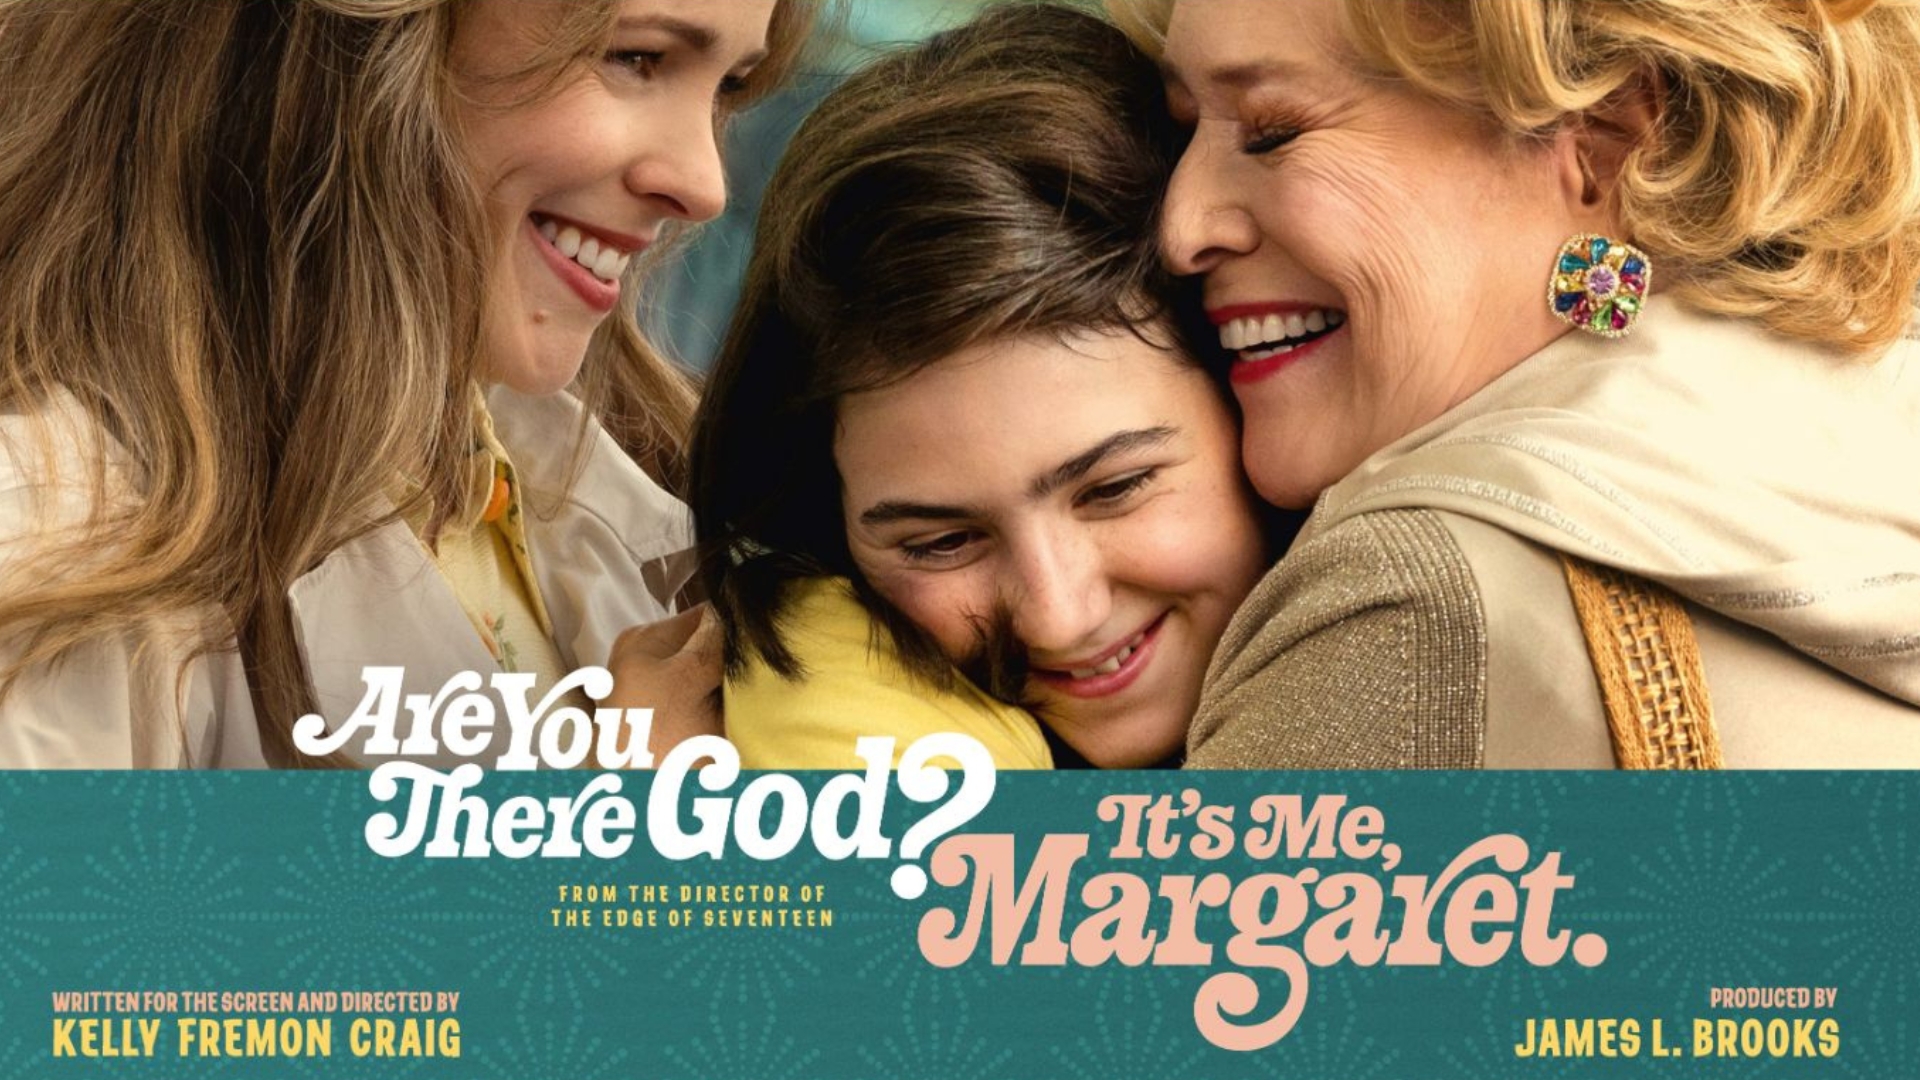 Movie Are You There God? It's Me, Margaret 4k Ultra HD Wallpaper